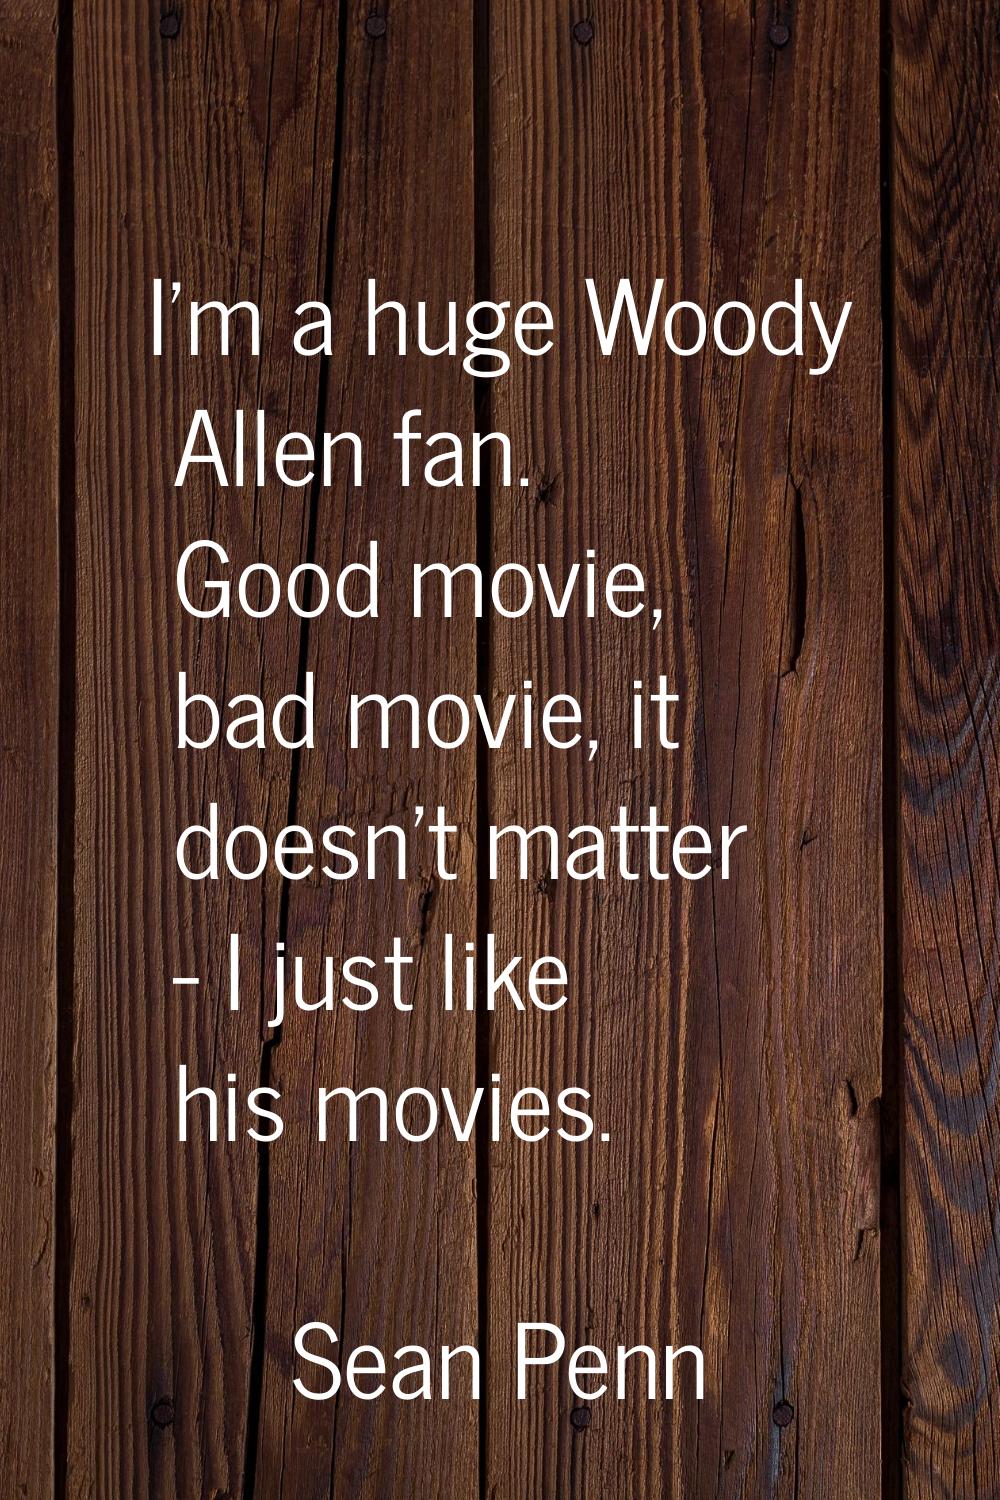 I'm a huge Woody Allen fan. Good movie, bad movie, it doesn't matter - I just like his movies.